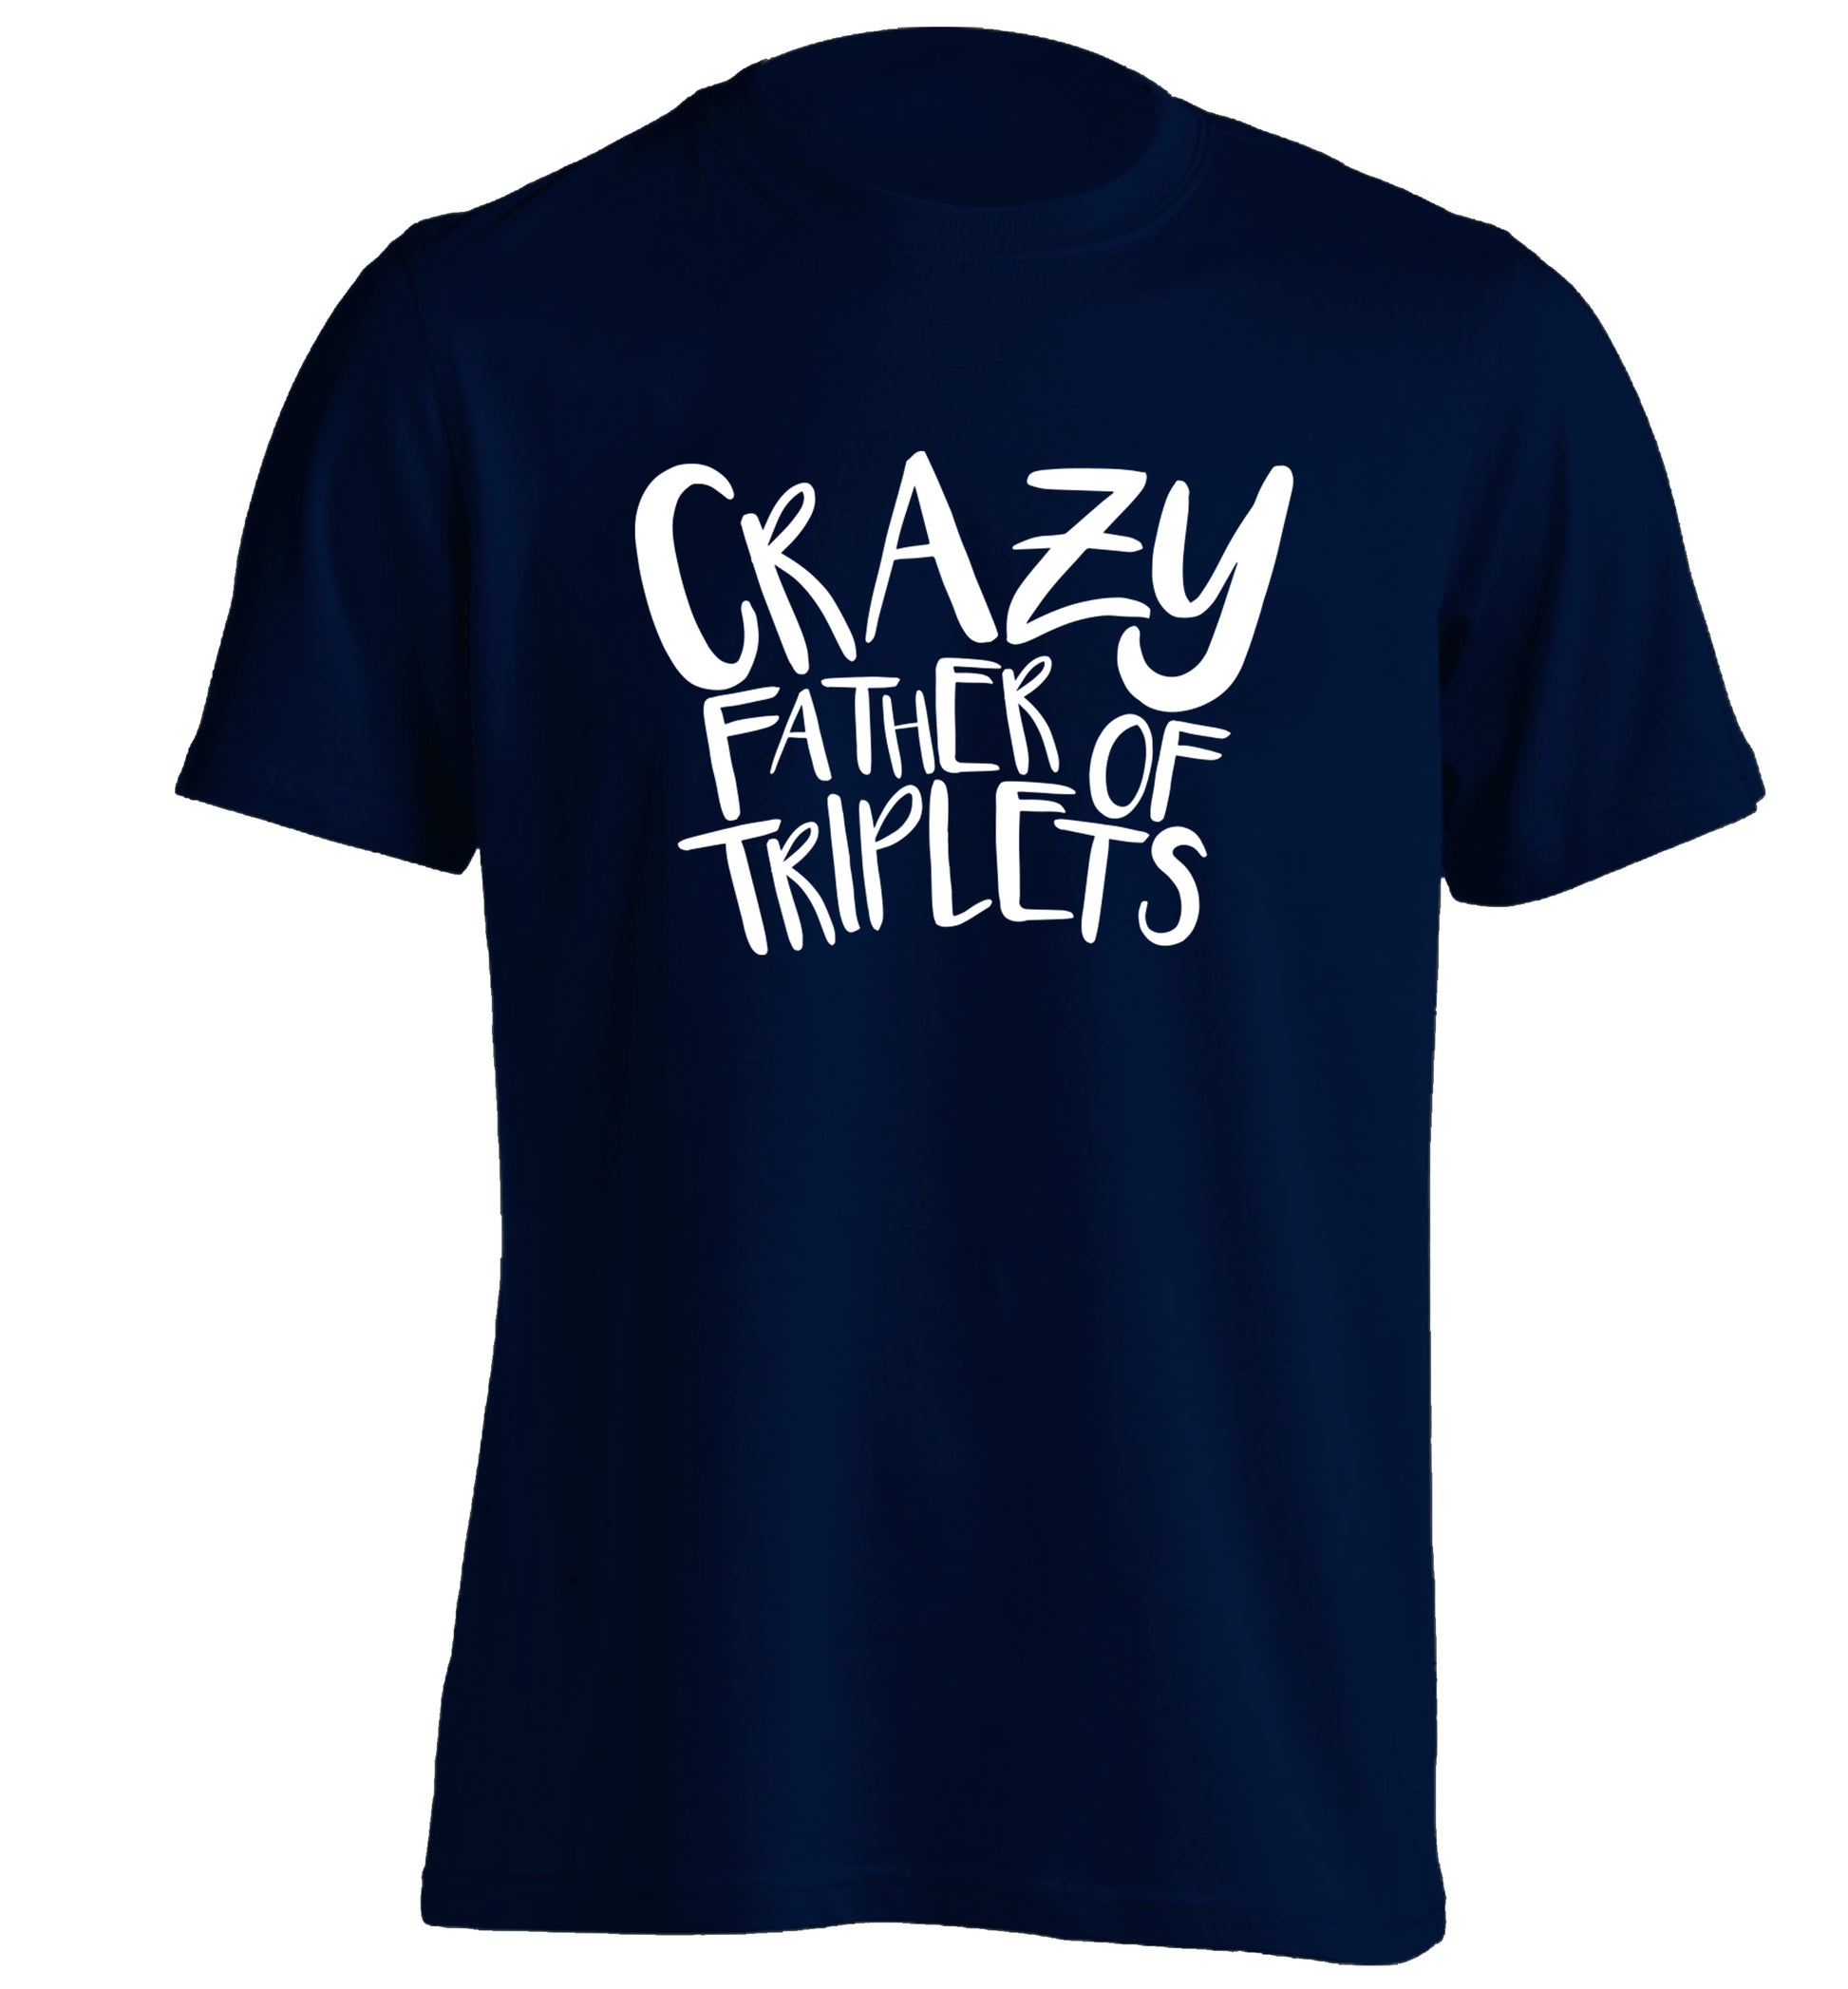 Crazy father of triplets adults unisex navy Tshirt 2XL